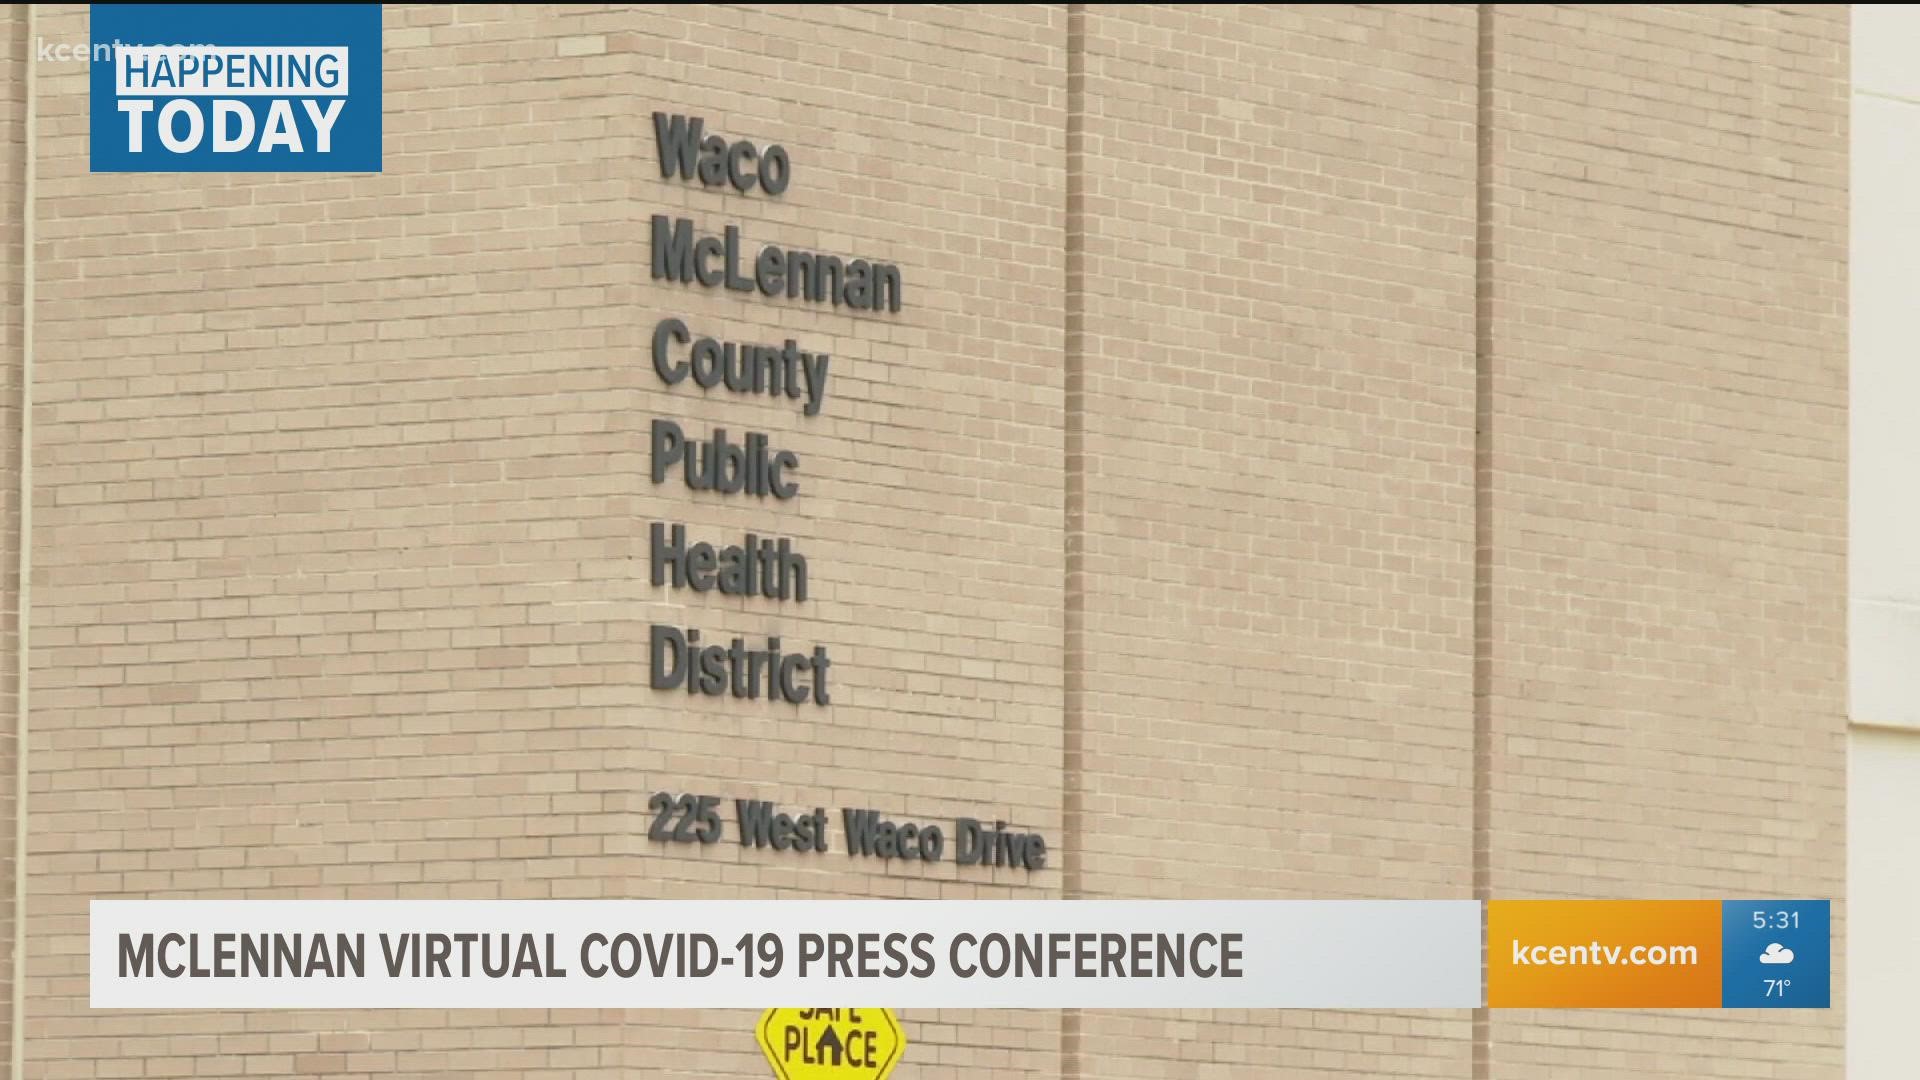 Maria Aguilera brings you all the details about McLennan County's virtual COVID-19 Press Conference.